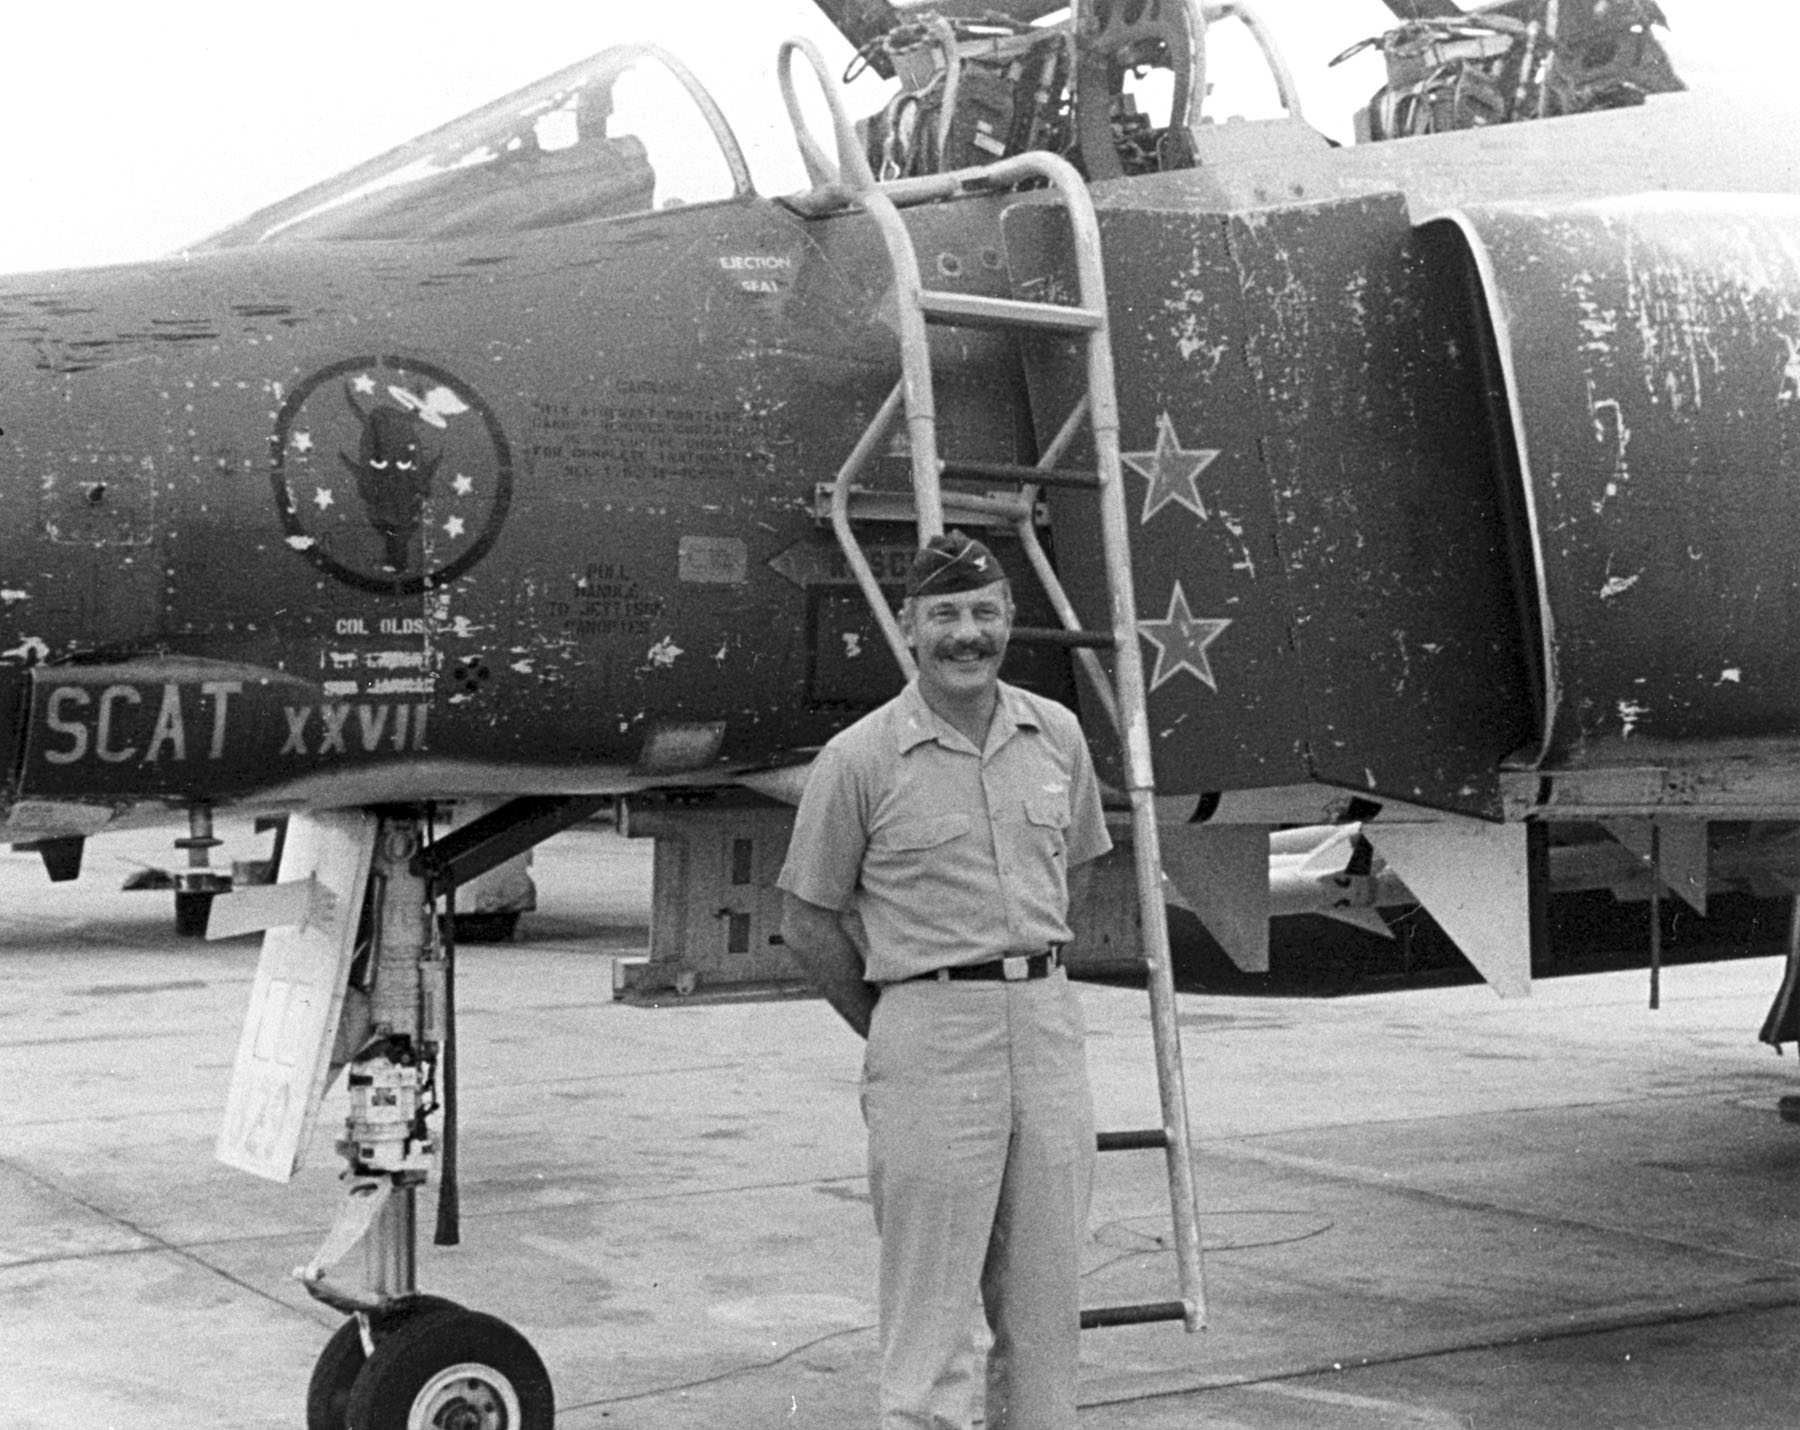 Coloenl Robin Olds, 8th Tactical Fighter Wing, with SCAT XXVII, his McDonnell F-4C-24-MC Phantom II, 64-0829, at Ubon Rachitani RTAFB, 1967. U.S. Air Force)